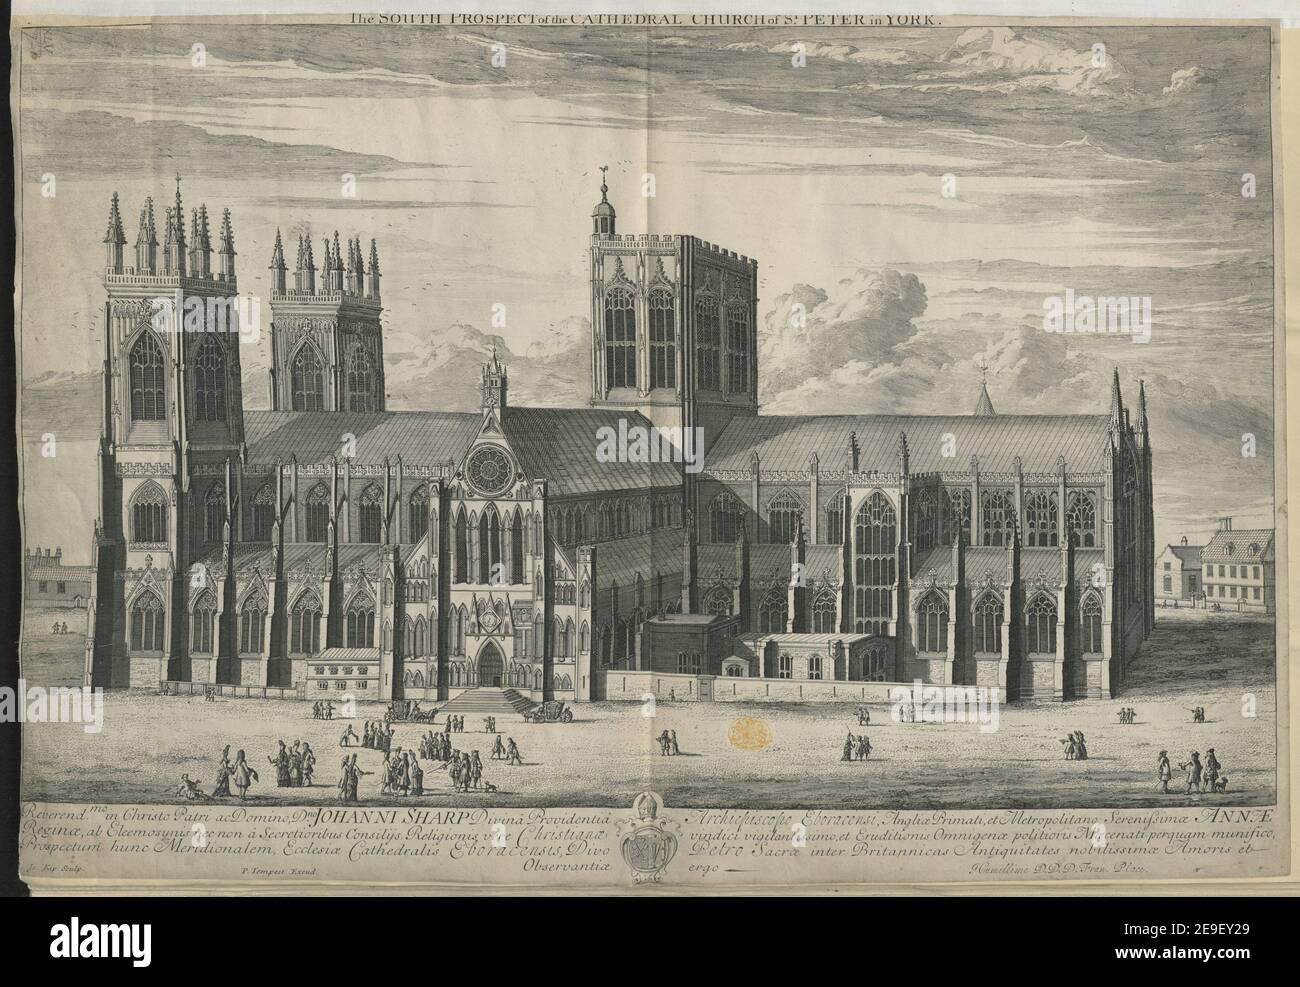 The South Prospect of the Cathedral Church of St. Peter in York.  Author  Kip, Johannes 45.7.i. Place of publication: [London] Publisher: [J. Smith , P. Tempest] Date of publication: [1710s c.]  Item type: 1 print Medium: etching and engraving Dimensions: sheet 44.7 x 64.8 cm [trimmed within platemark].  Former owner: George III, King of Great Britain, 1738-1820 Stock Photo